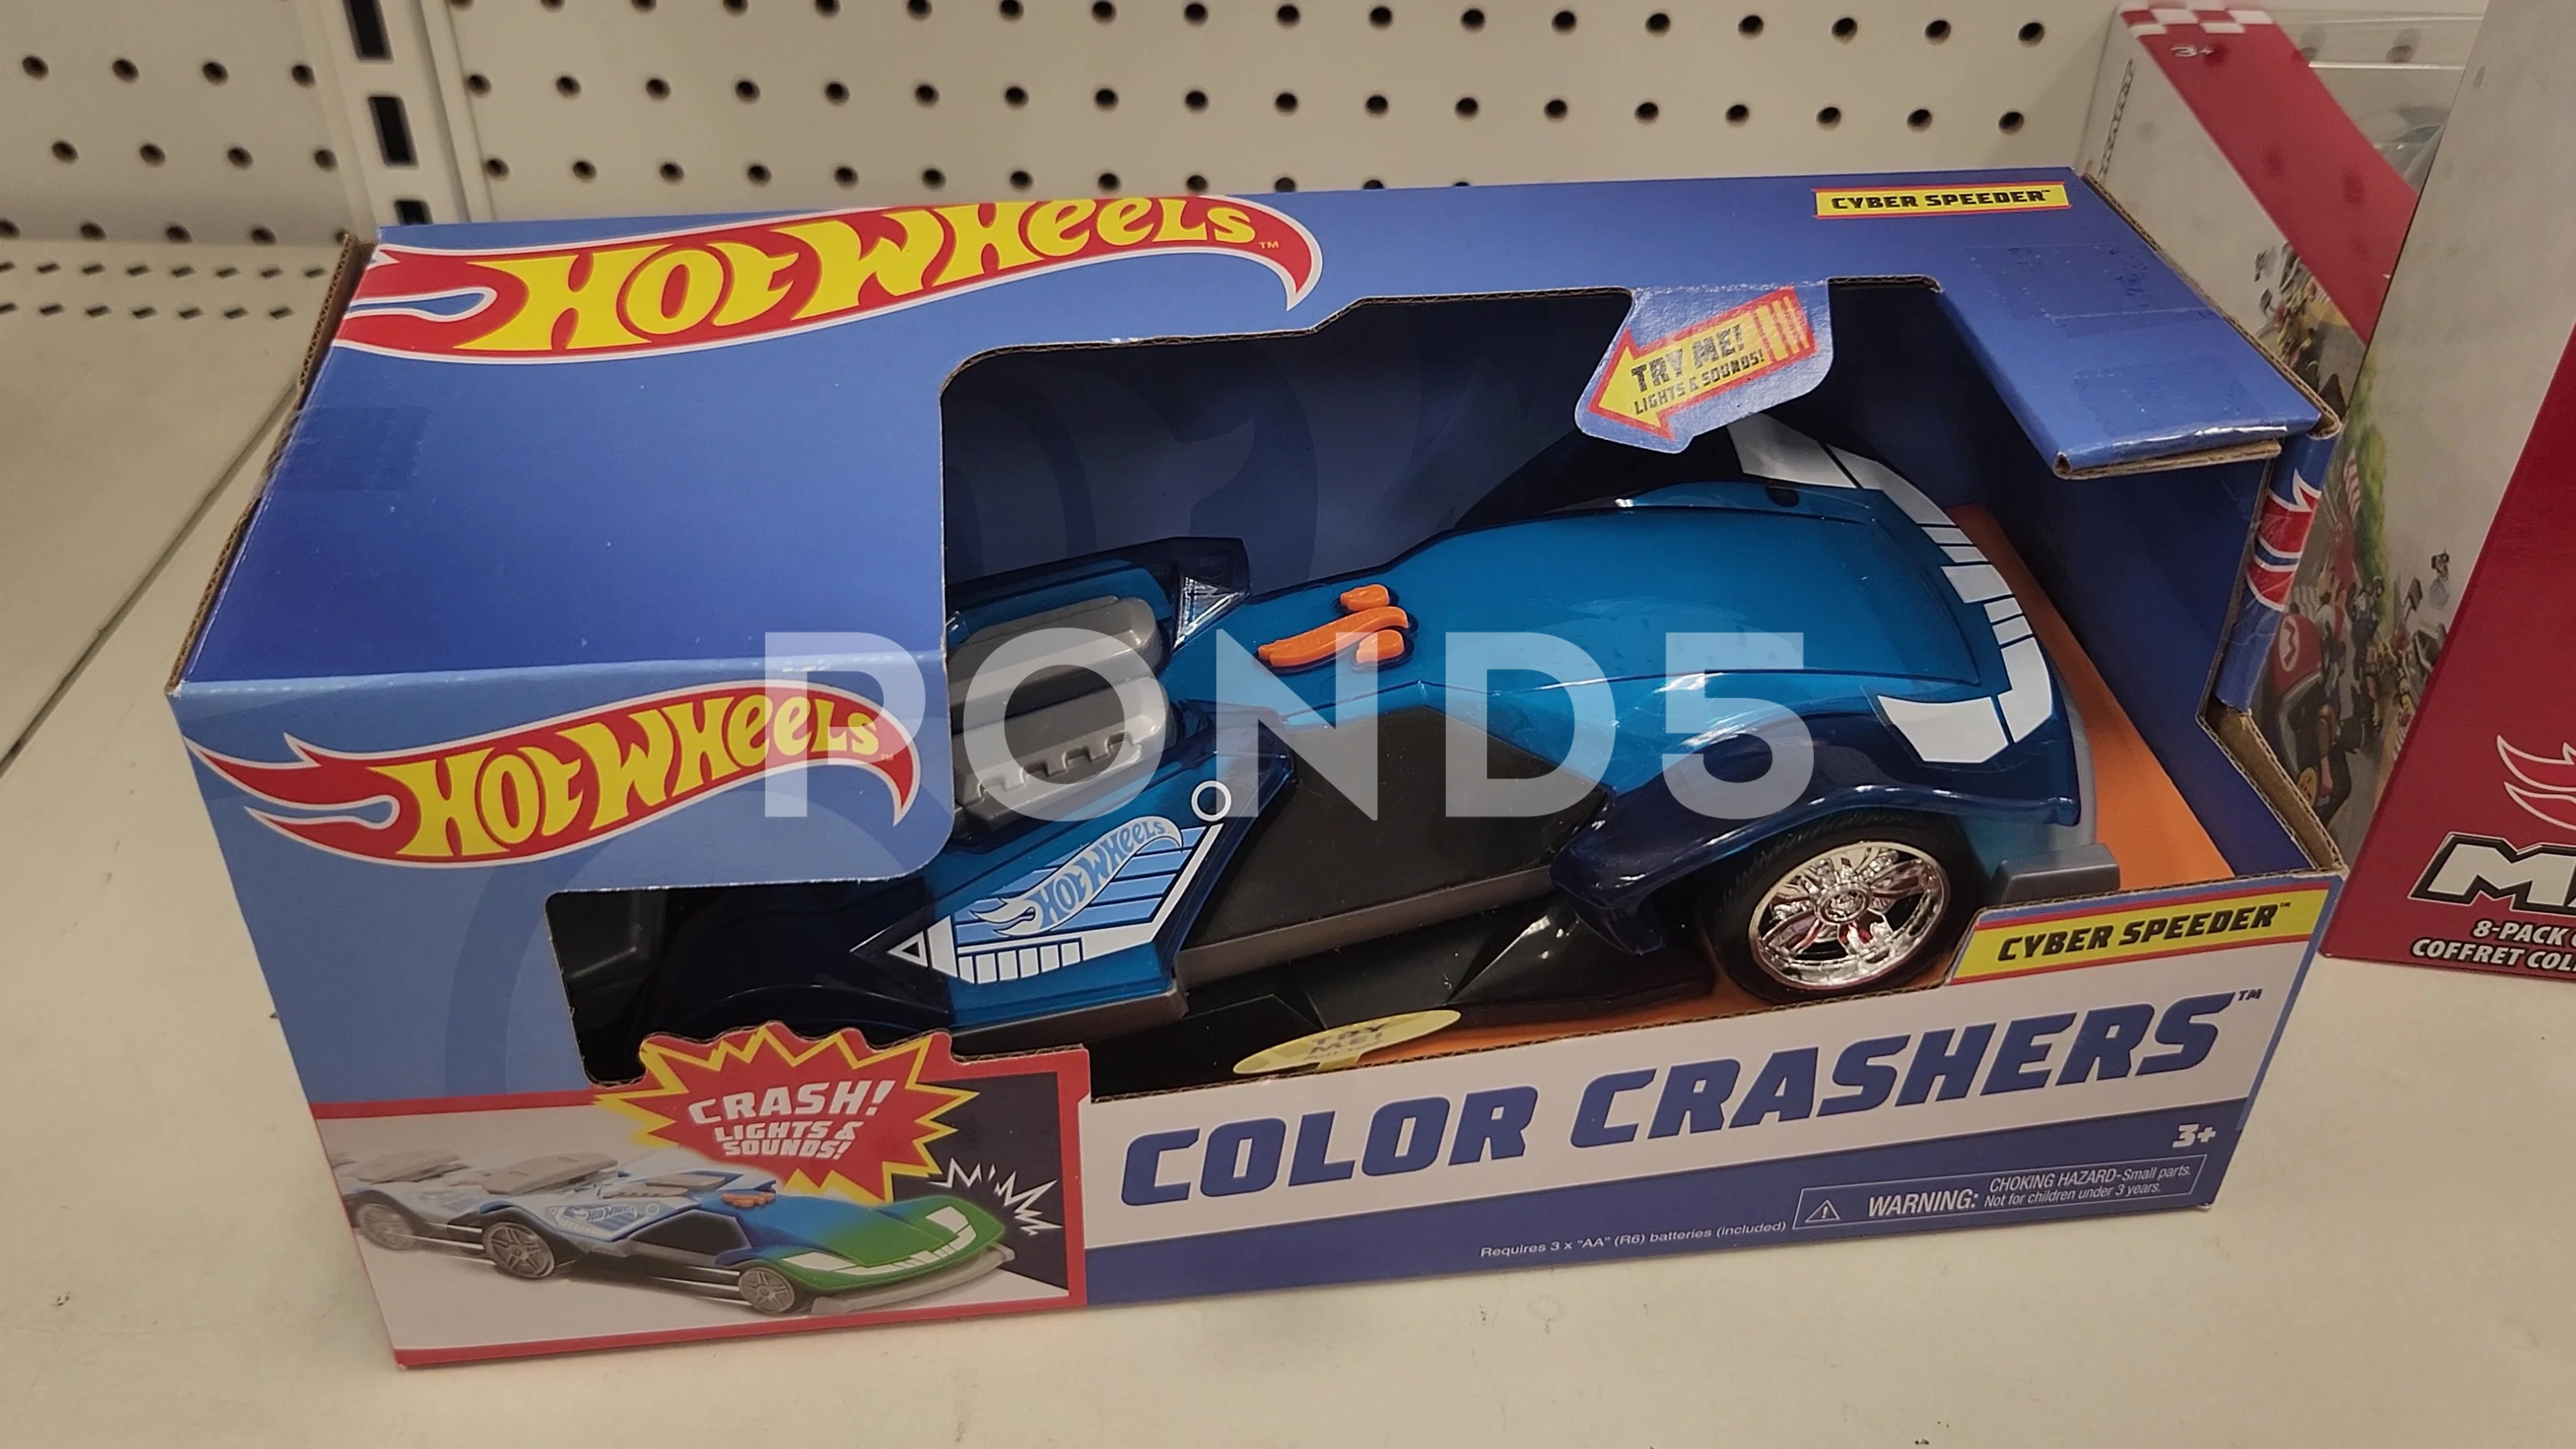 Hot Wheels Color Crashers Cyber Speeder Motorized Toy Vehicle